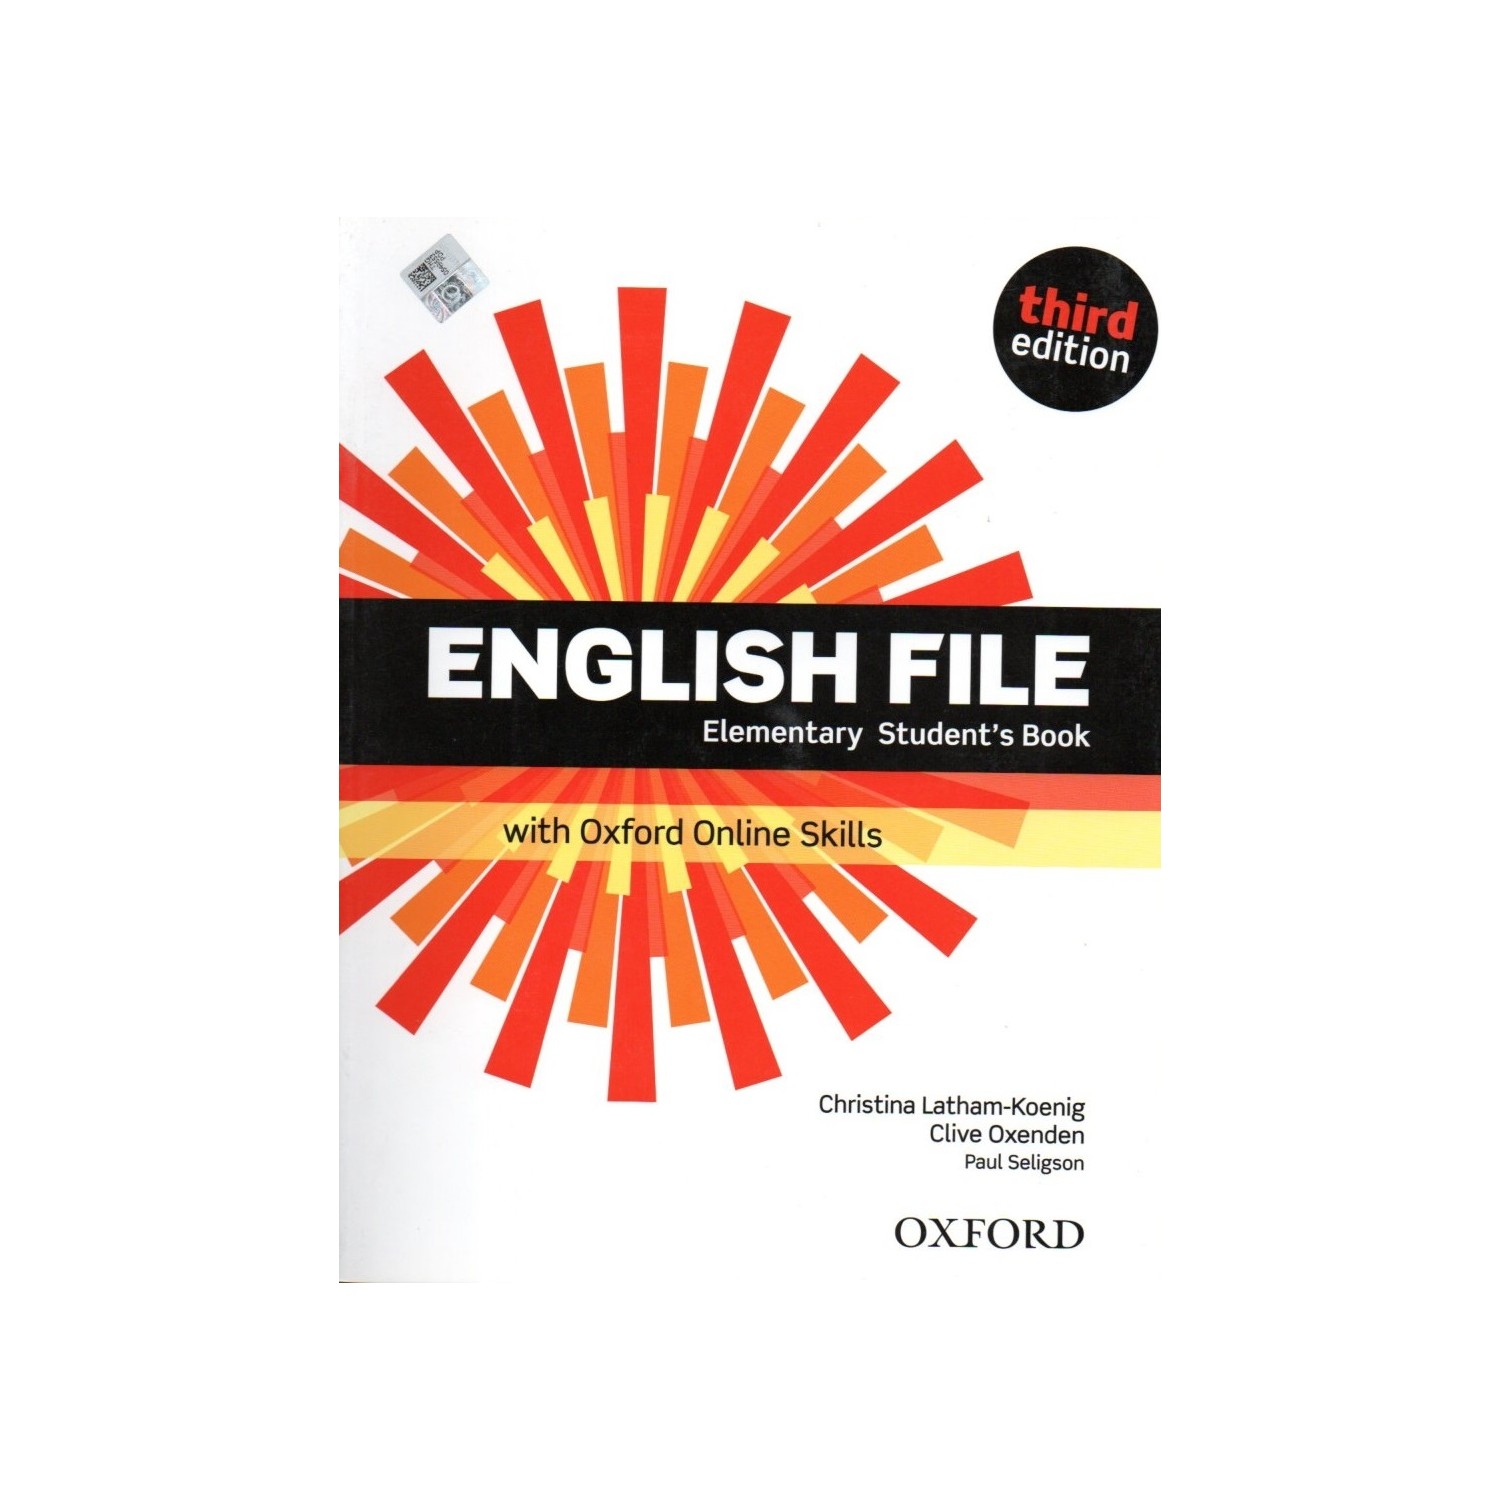 New file elementary student s book. New English file Elementary третье издание. Учебник English file Elementary. English file Elementary student's book. English file 3 Elementary.